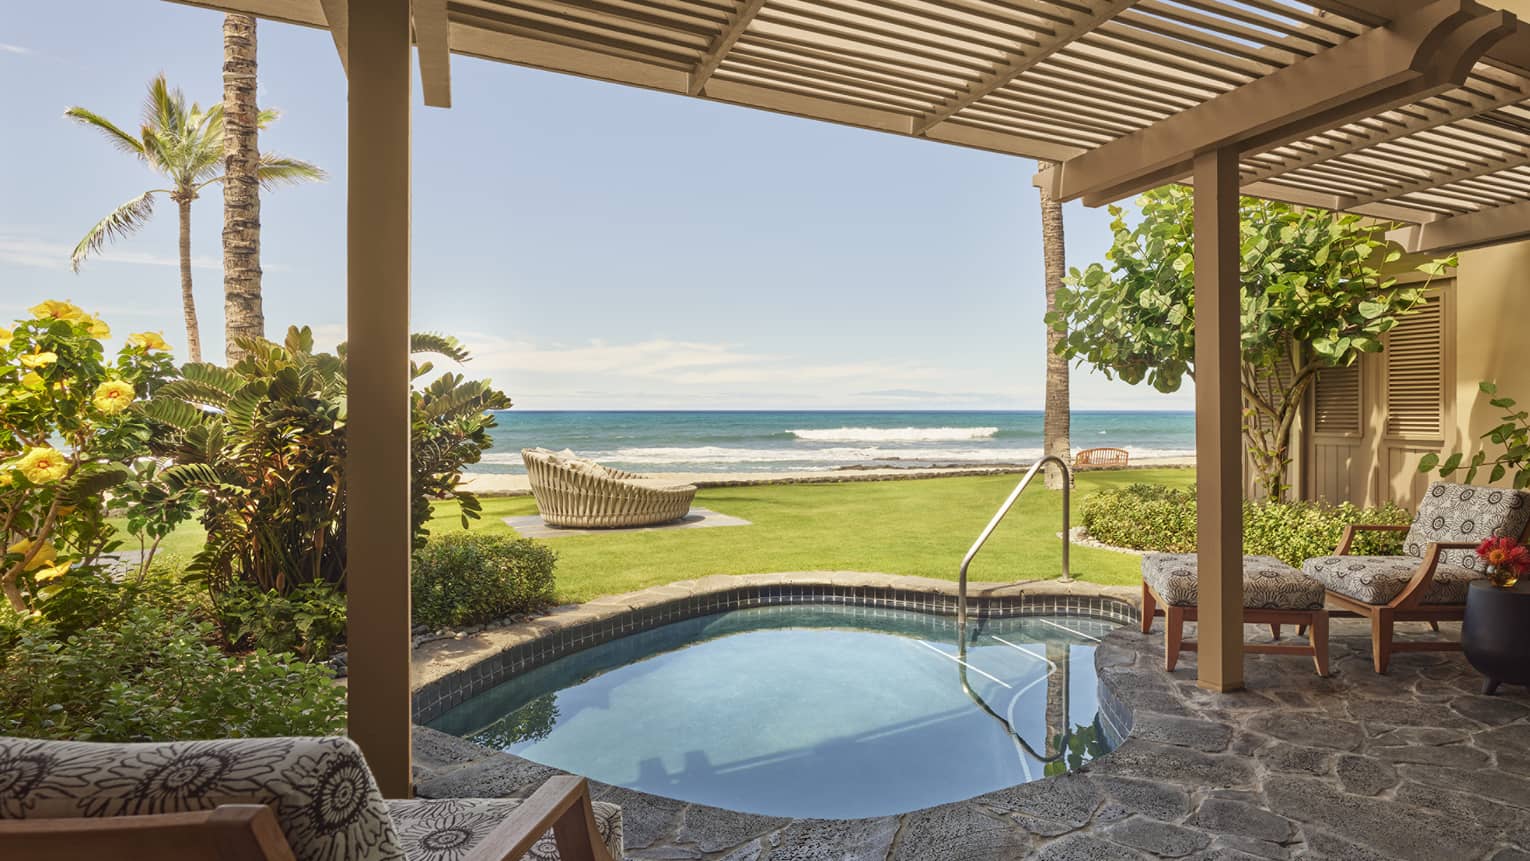 Private stone terrace with wooden pergola, plunge pool and beach view